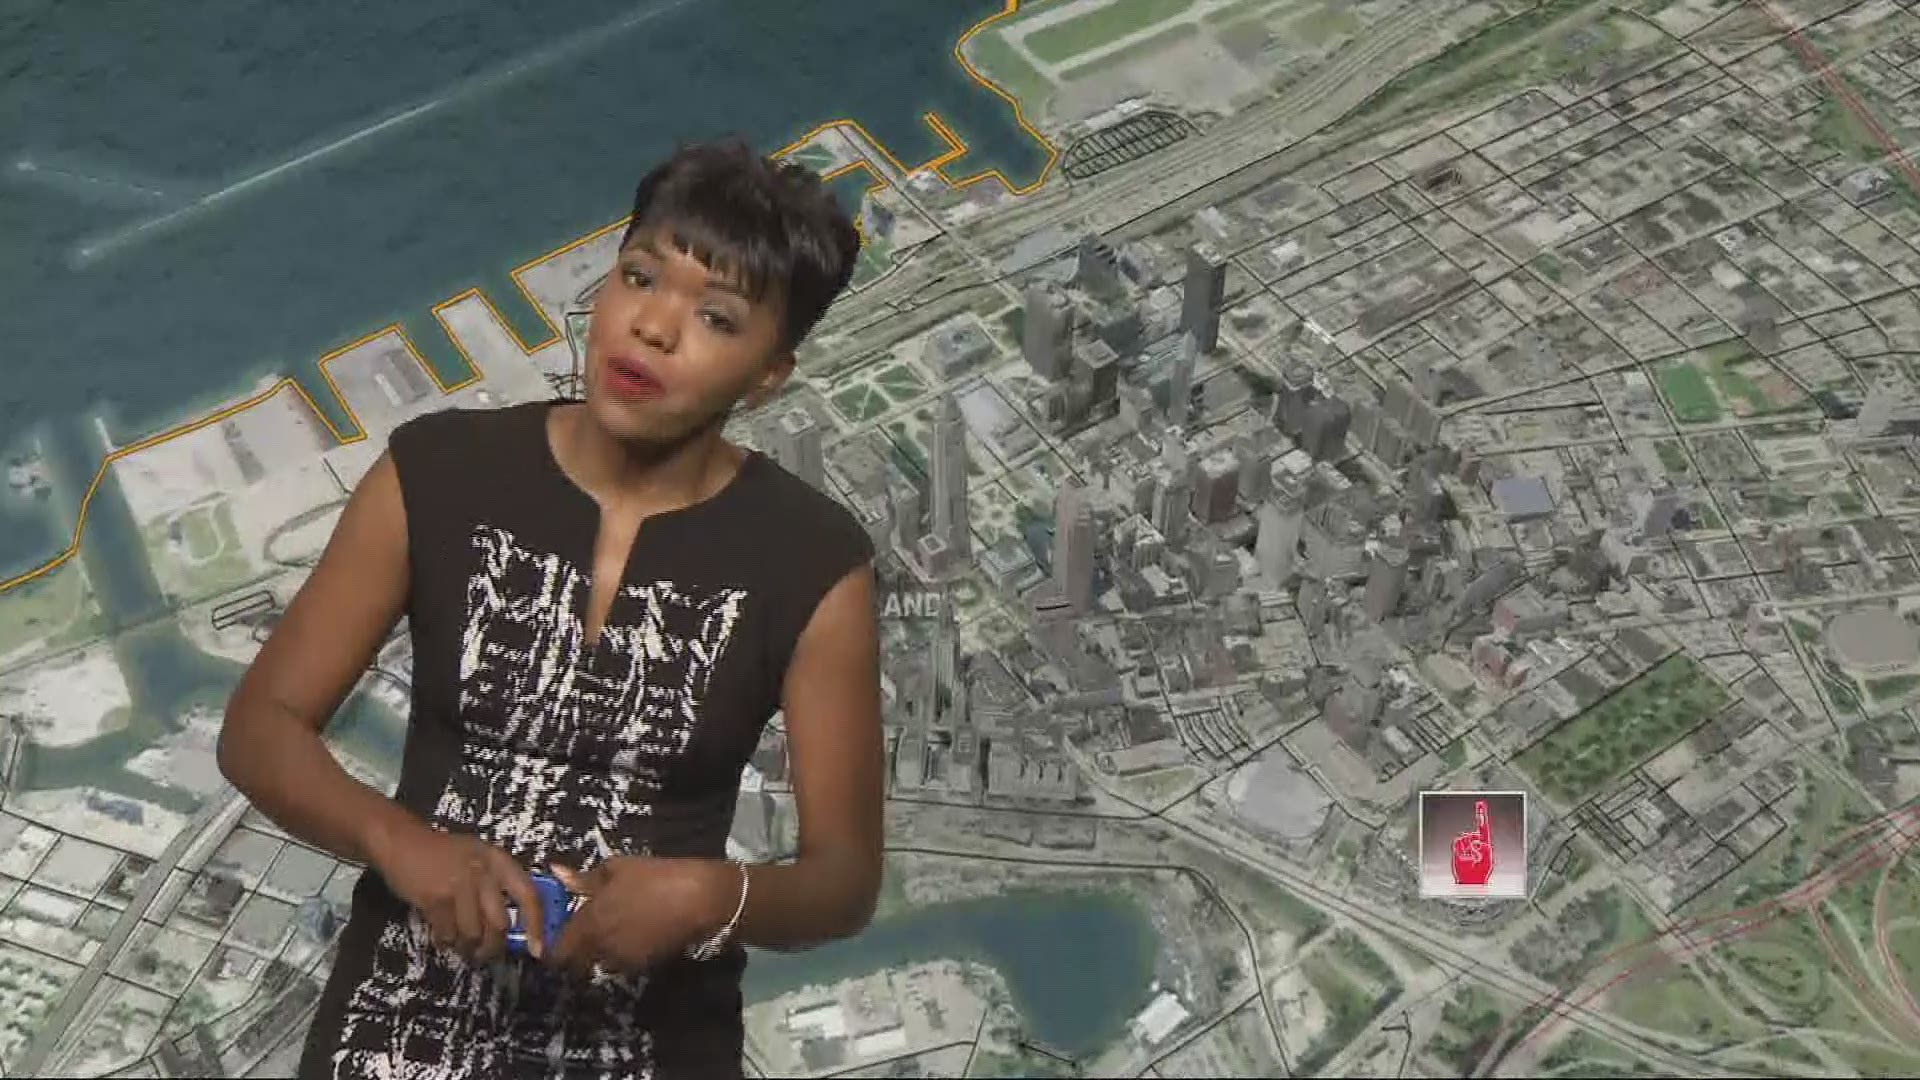 WKYC's Danielle Wiggins updates the traffic in downtown Cleveland with both the Indians and Browns playing on Thursday night.